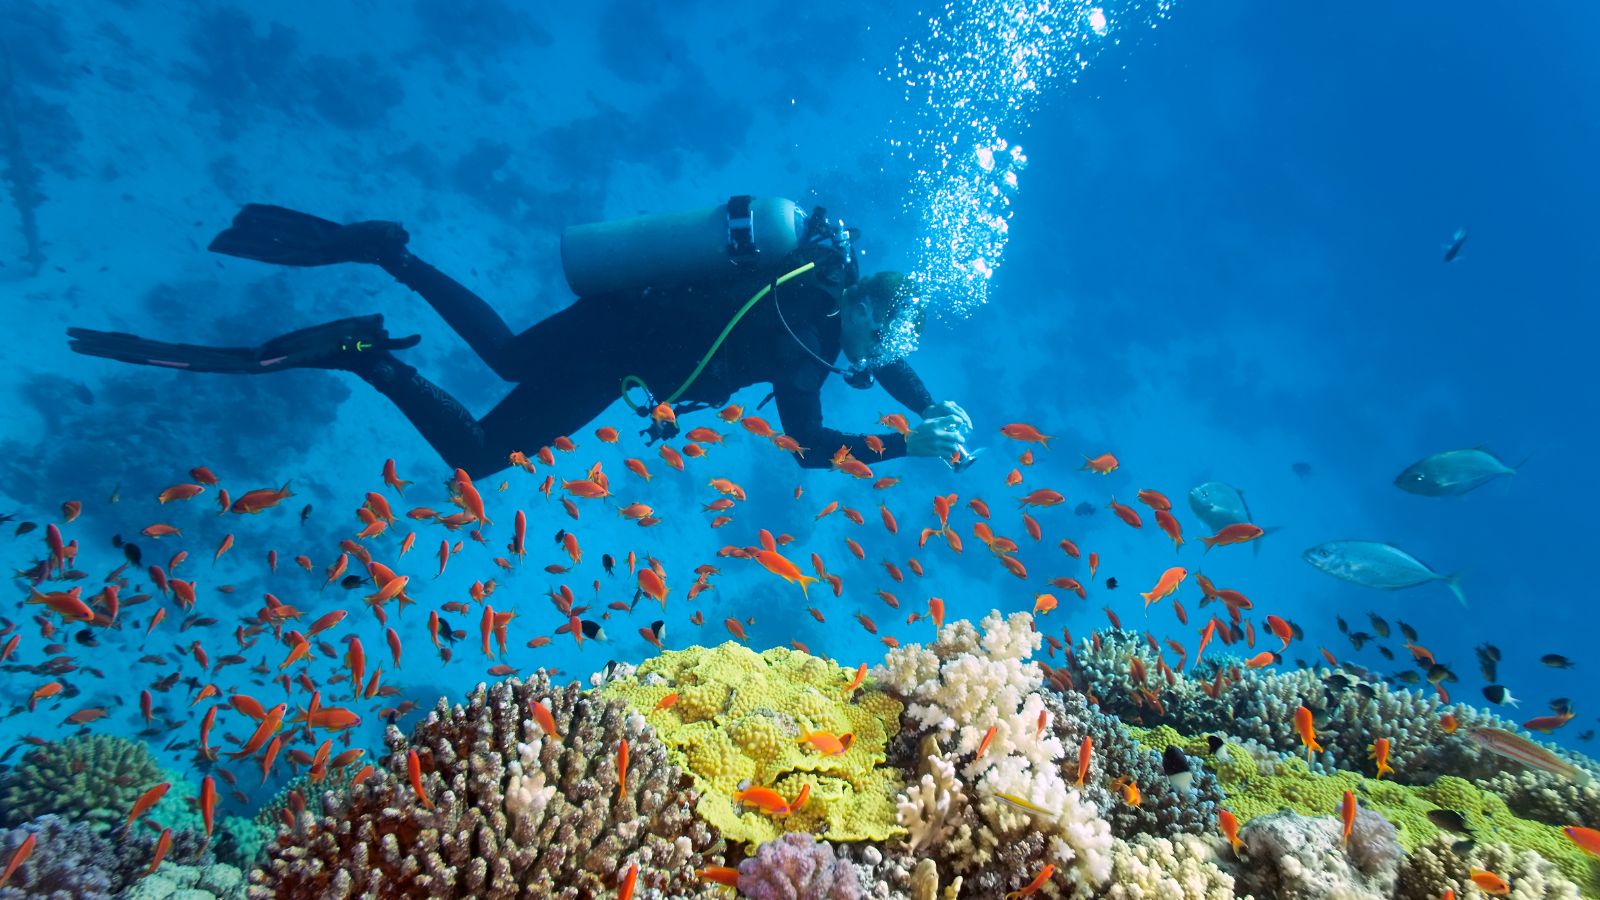 <p>Are you looking for the next best place to scuba dive? Your next underwater paradise is waiting for you! Scuba diving is one of the best things to do while traveling. It allows you to explore places you could never see if you weren’t a scuba diver.</p> <p>There are so many incredible places to scuba dive that it can almost feel overwhelming to choose the place you will visit next. That’s why I’ve narrowed it down to the top 10 scuba diving locations around the world so you can choose your next vacation spot a little easier.</p>